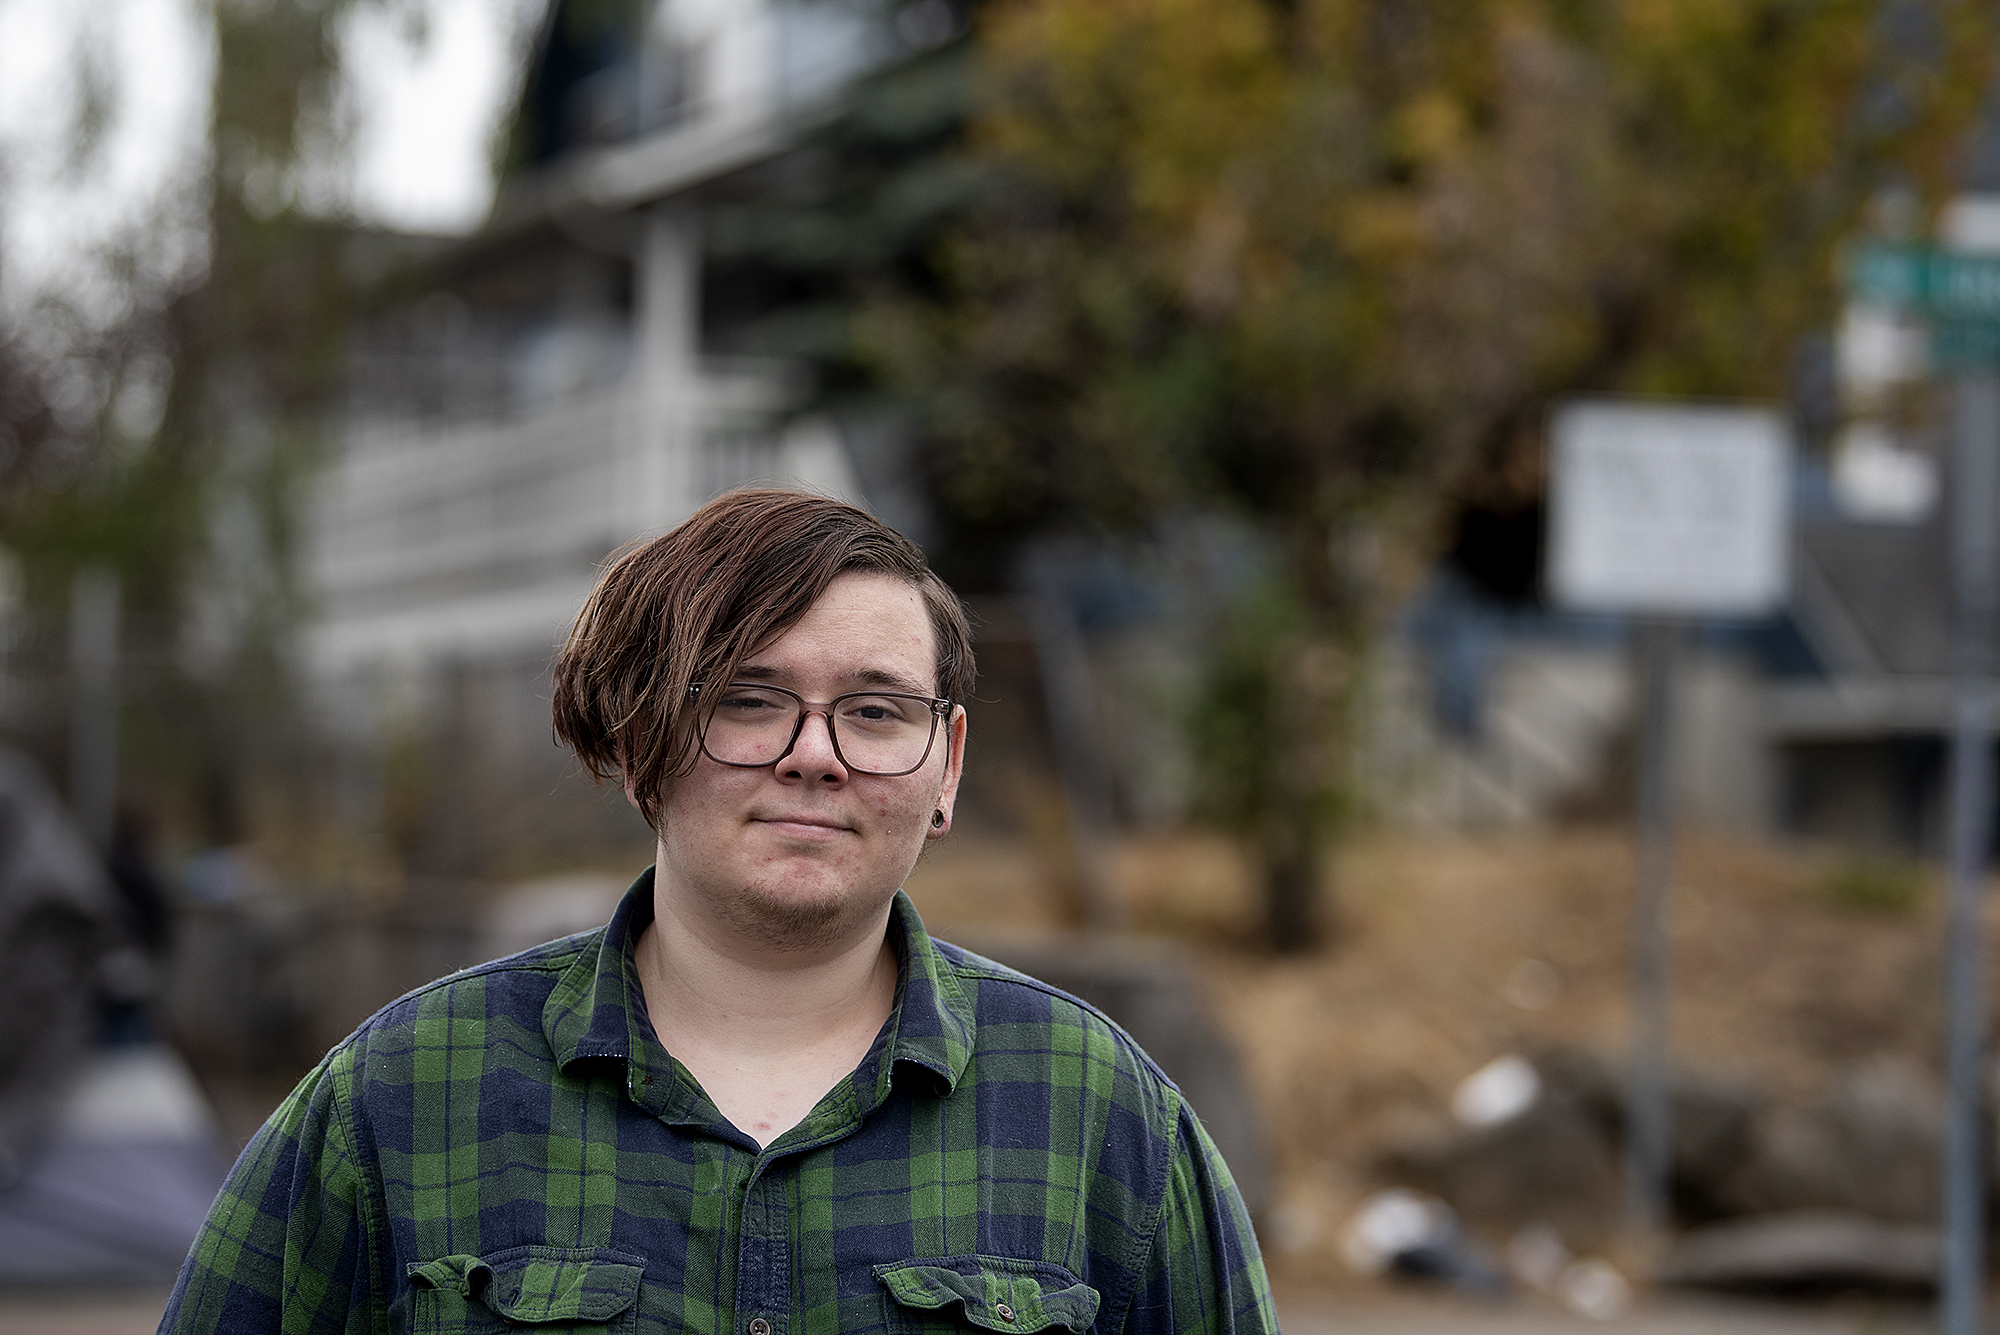 Ari, a 23-year-old living in Clark County, stands outside the Share House men’s shelter in downtown Vancouver. Though Ari said he will always be grateful for his Share House bed, he also experienced abuse as a transgender youth in an all-men’s shelter. “Clark County definitely, completely needs an LGBT shelter and they need it soon,” he said.